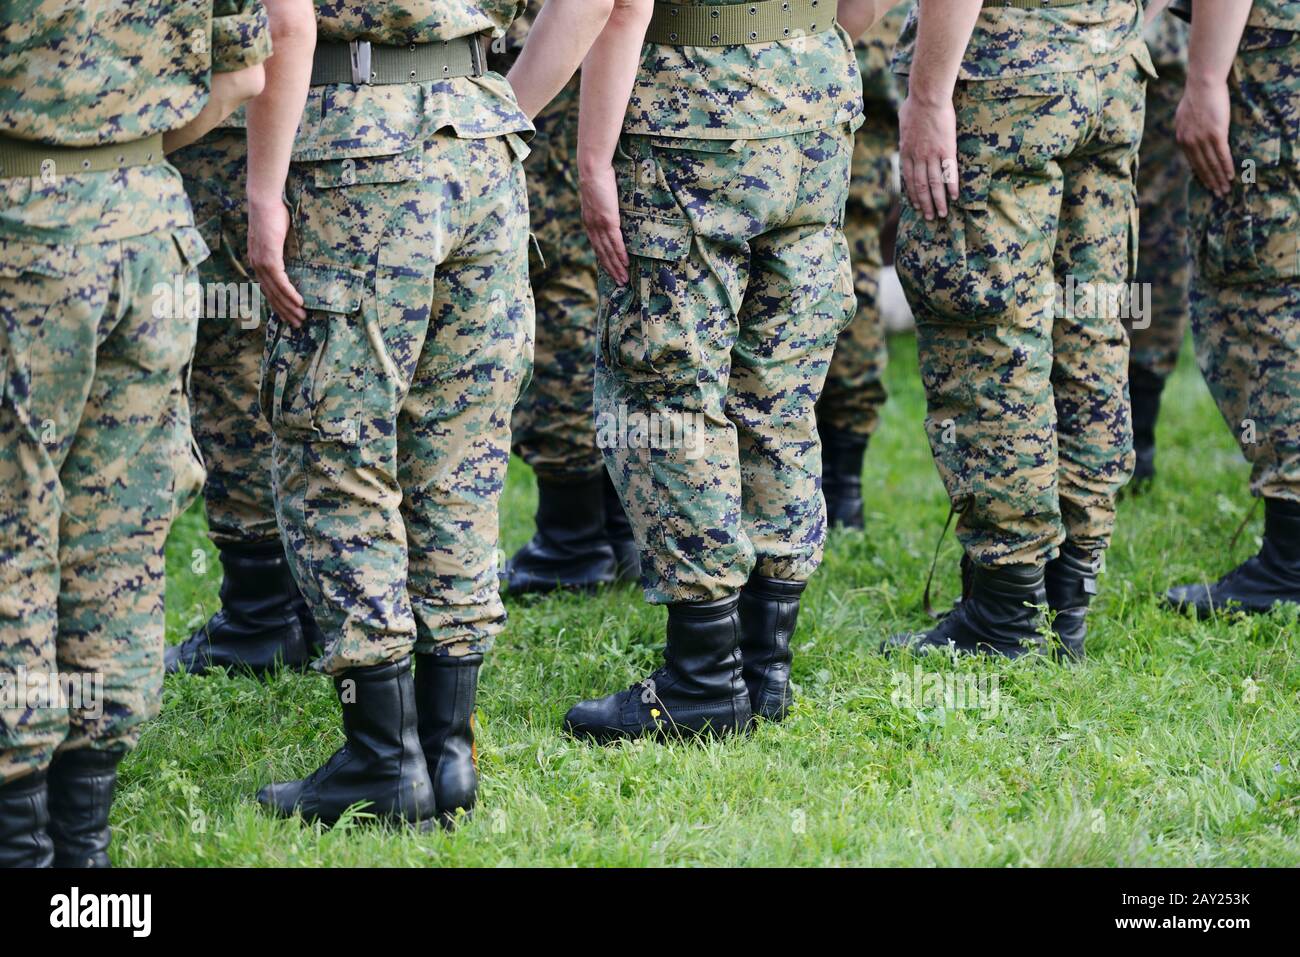 Soldiers with military camouflage uniform in army formation Stock Photo